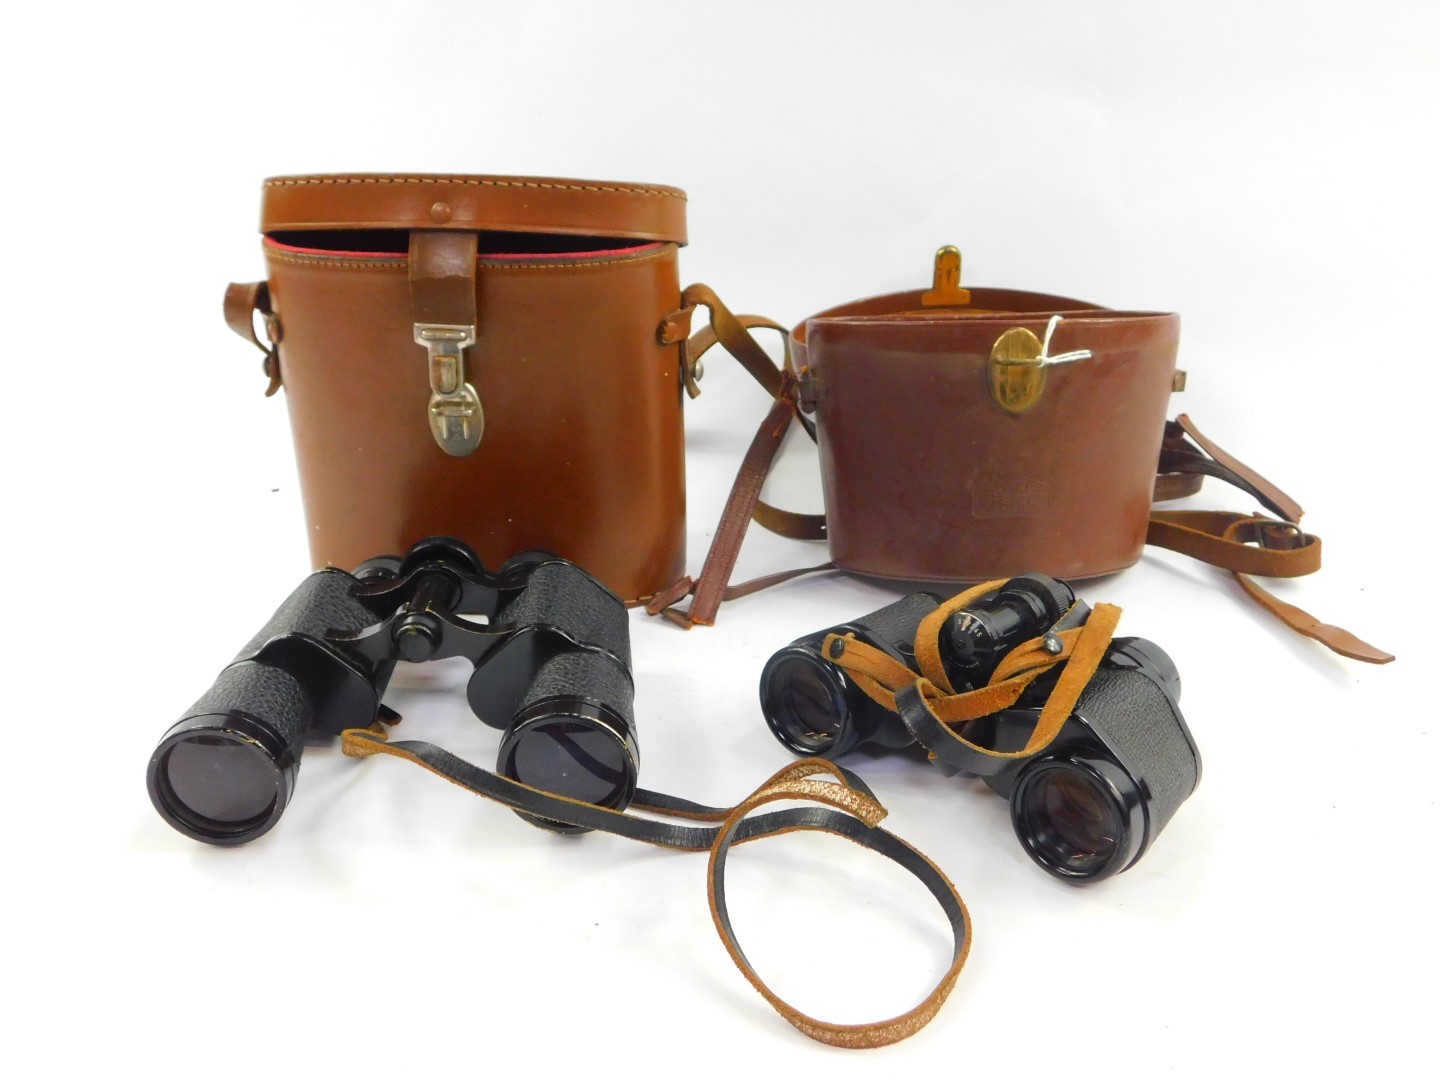 A pair of Lieberman & Gortz 12x40 military binoculars, cased, together with a pair of Carl Zeiss 8x3